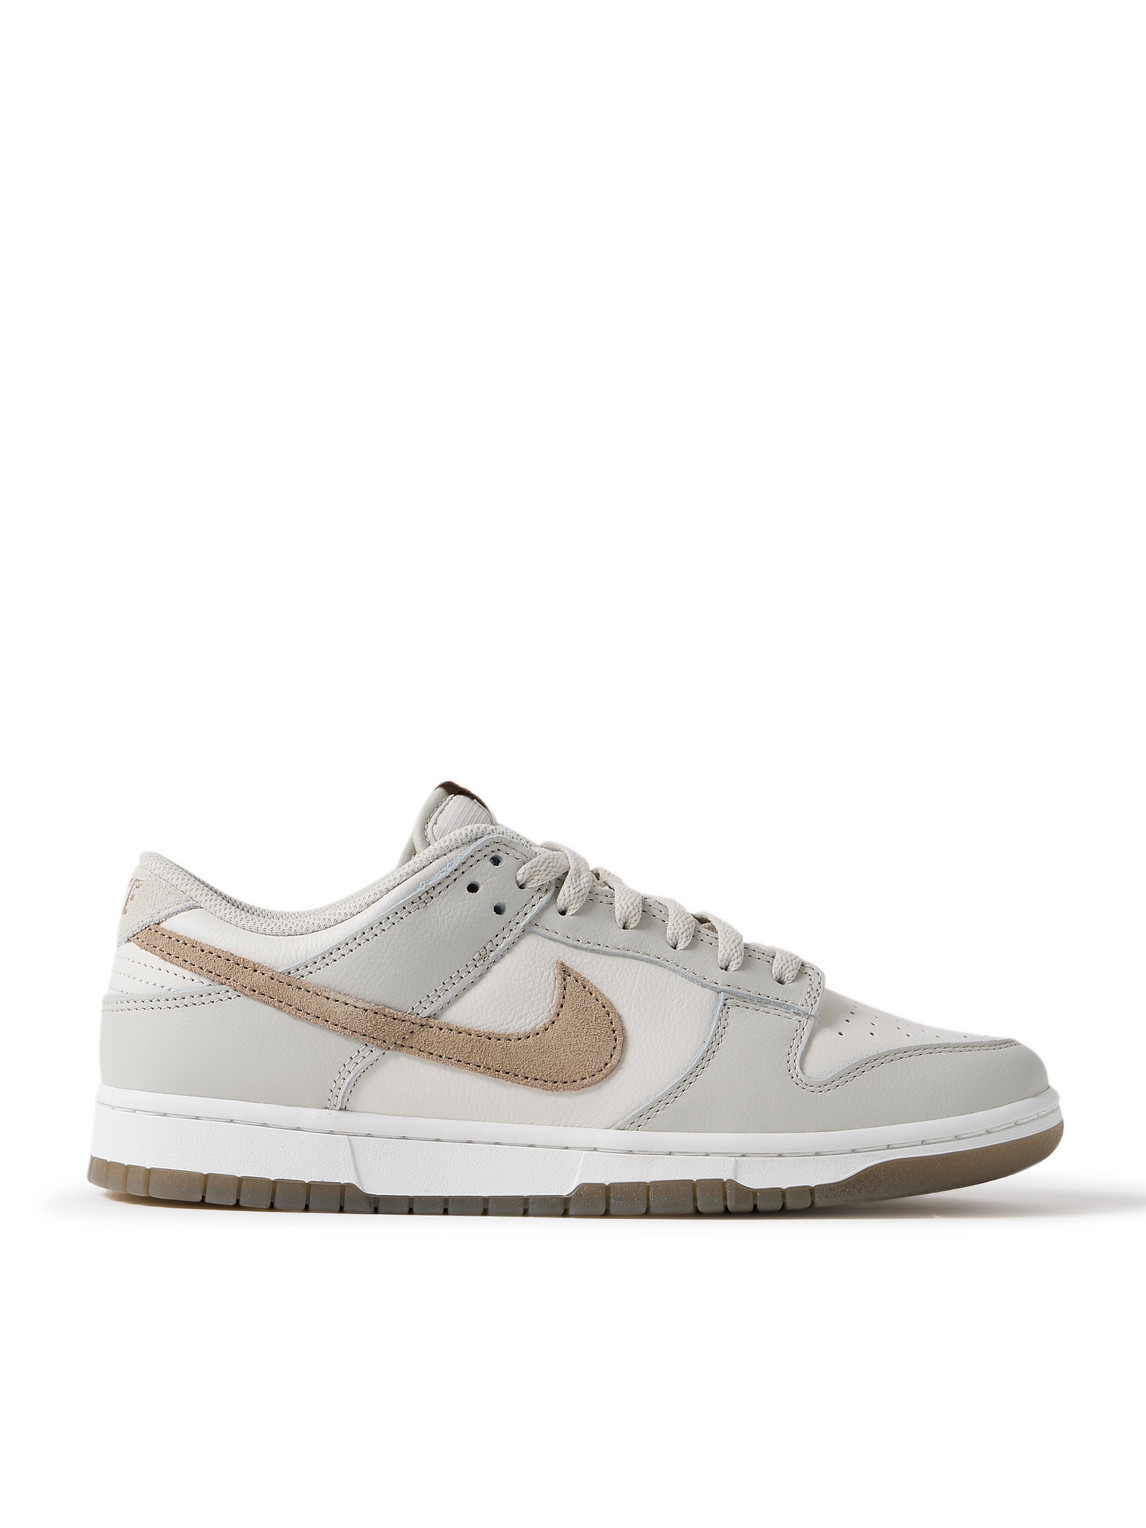 Dunk Low Retro SE Suede-Trimmed Leather Sneakers